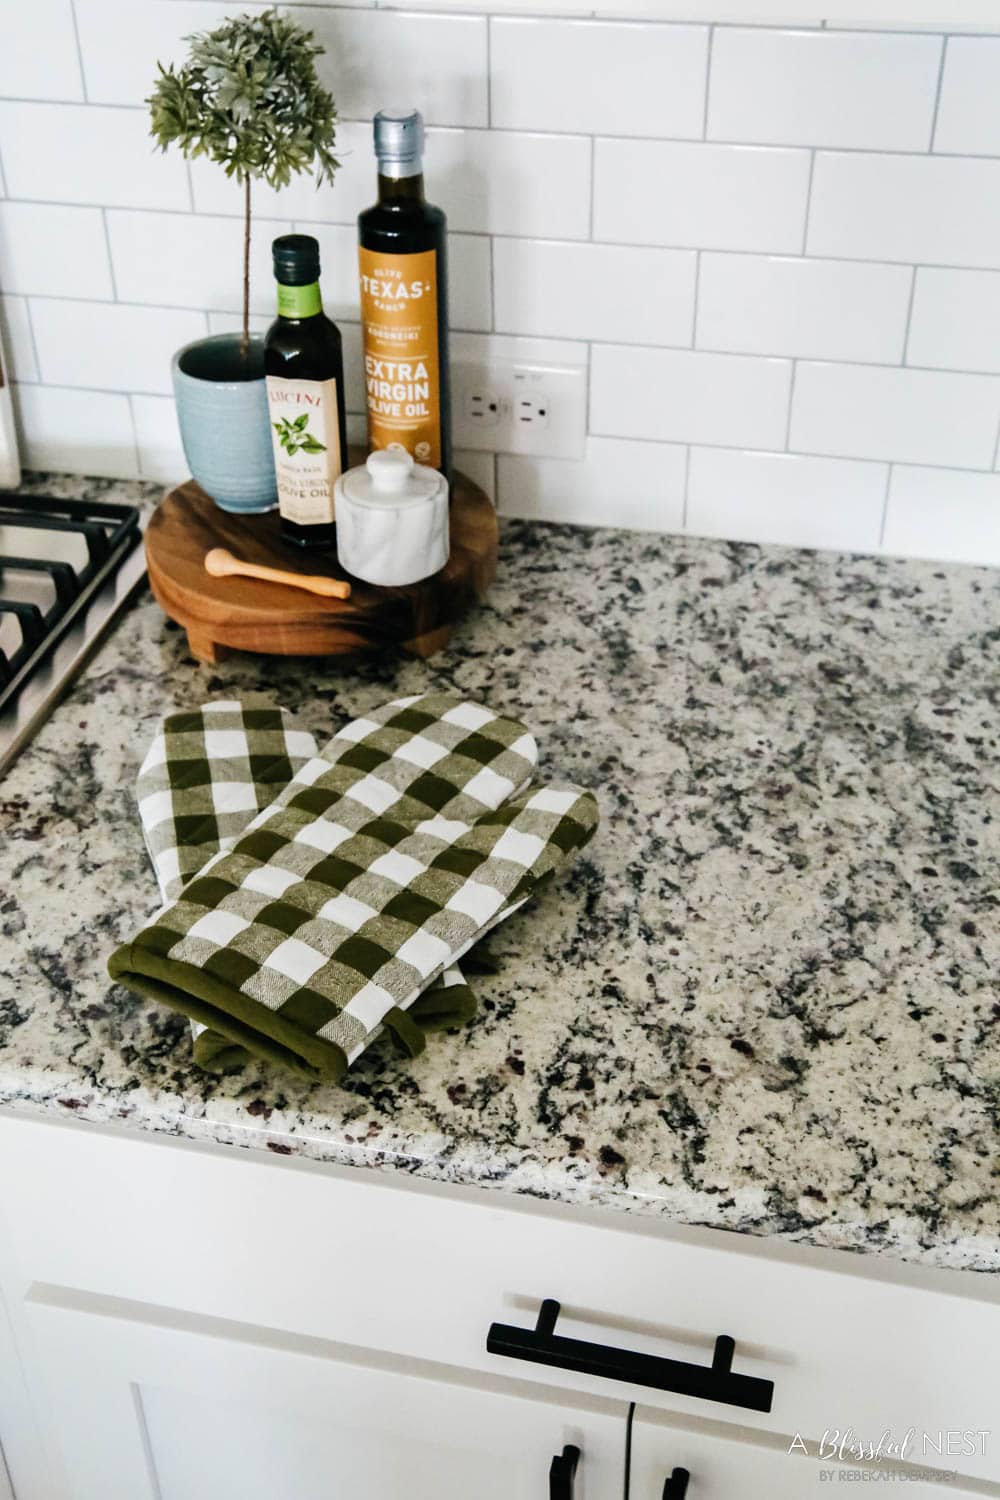 Green and white check oven mitts sitting on a counter top.